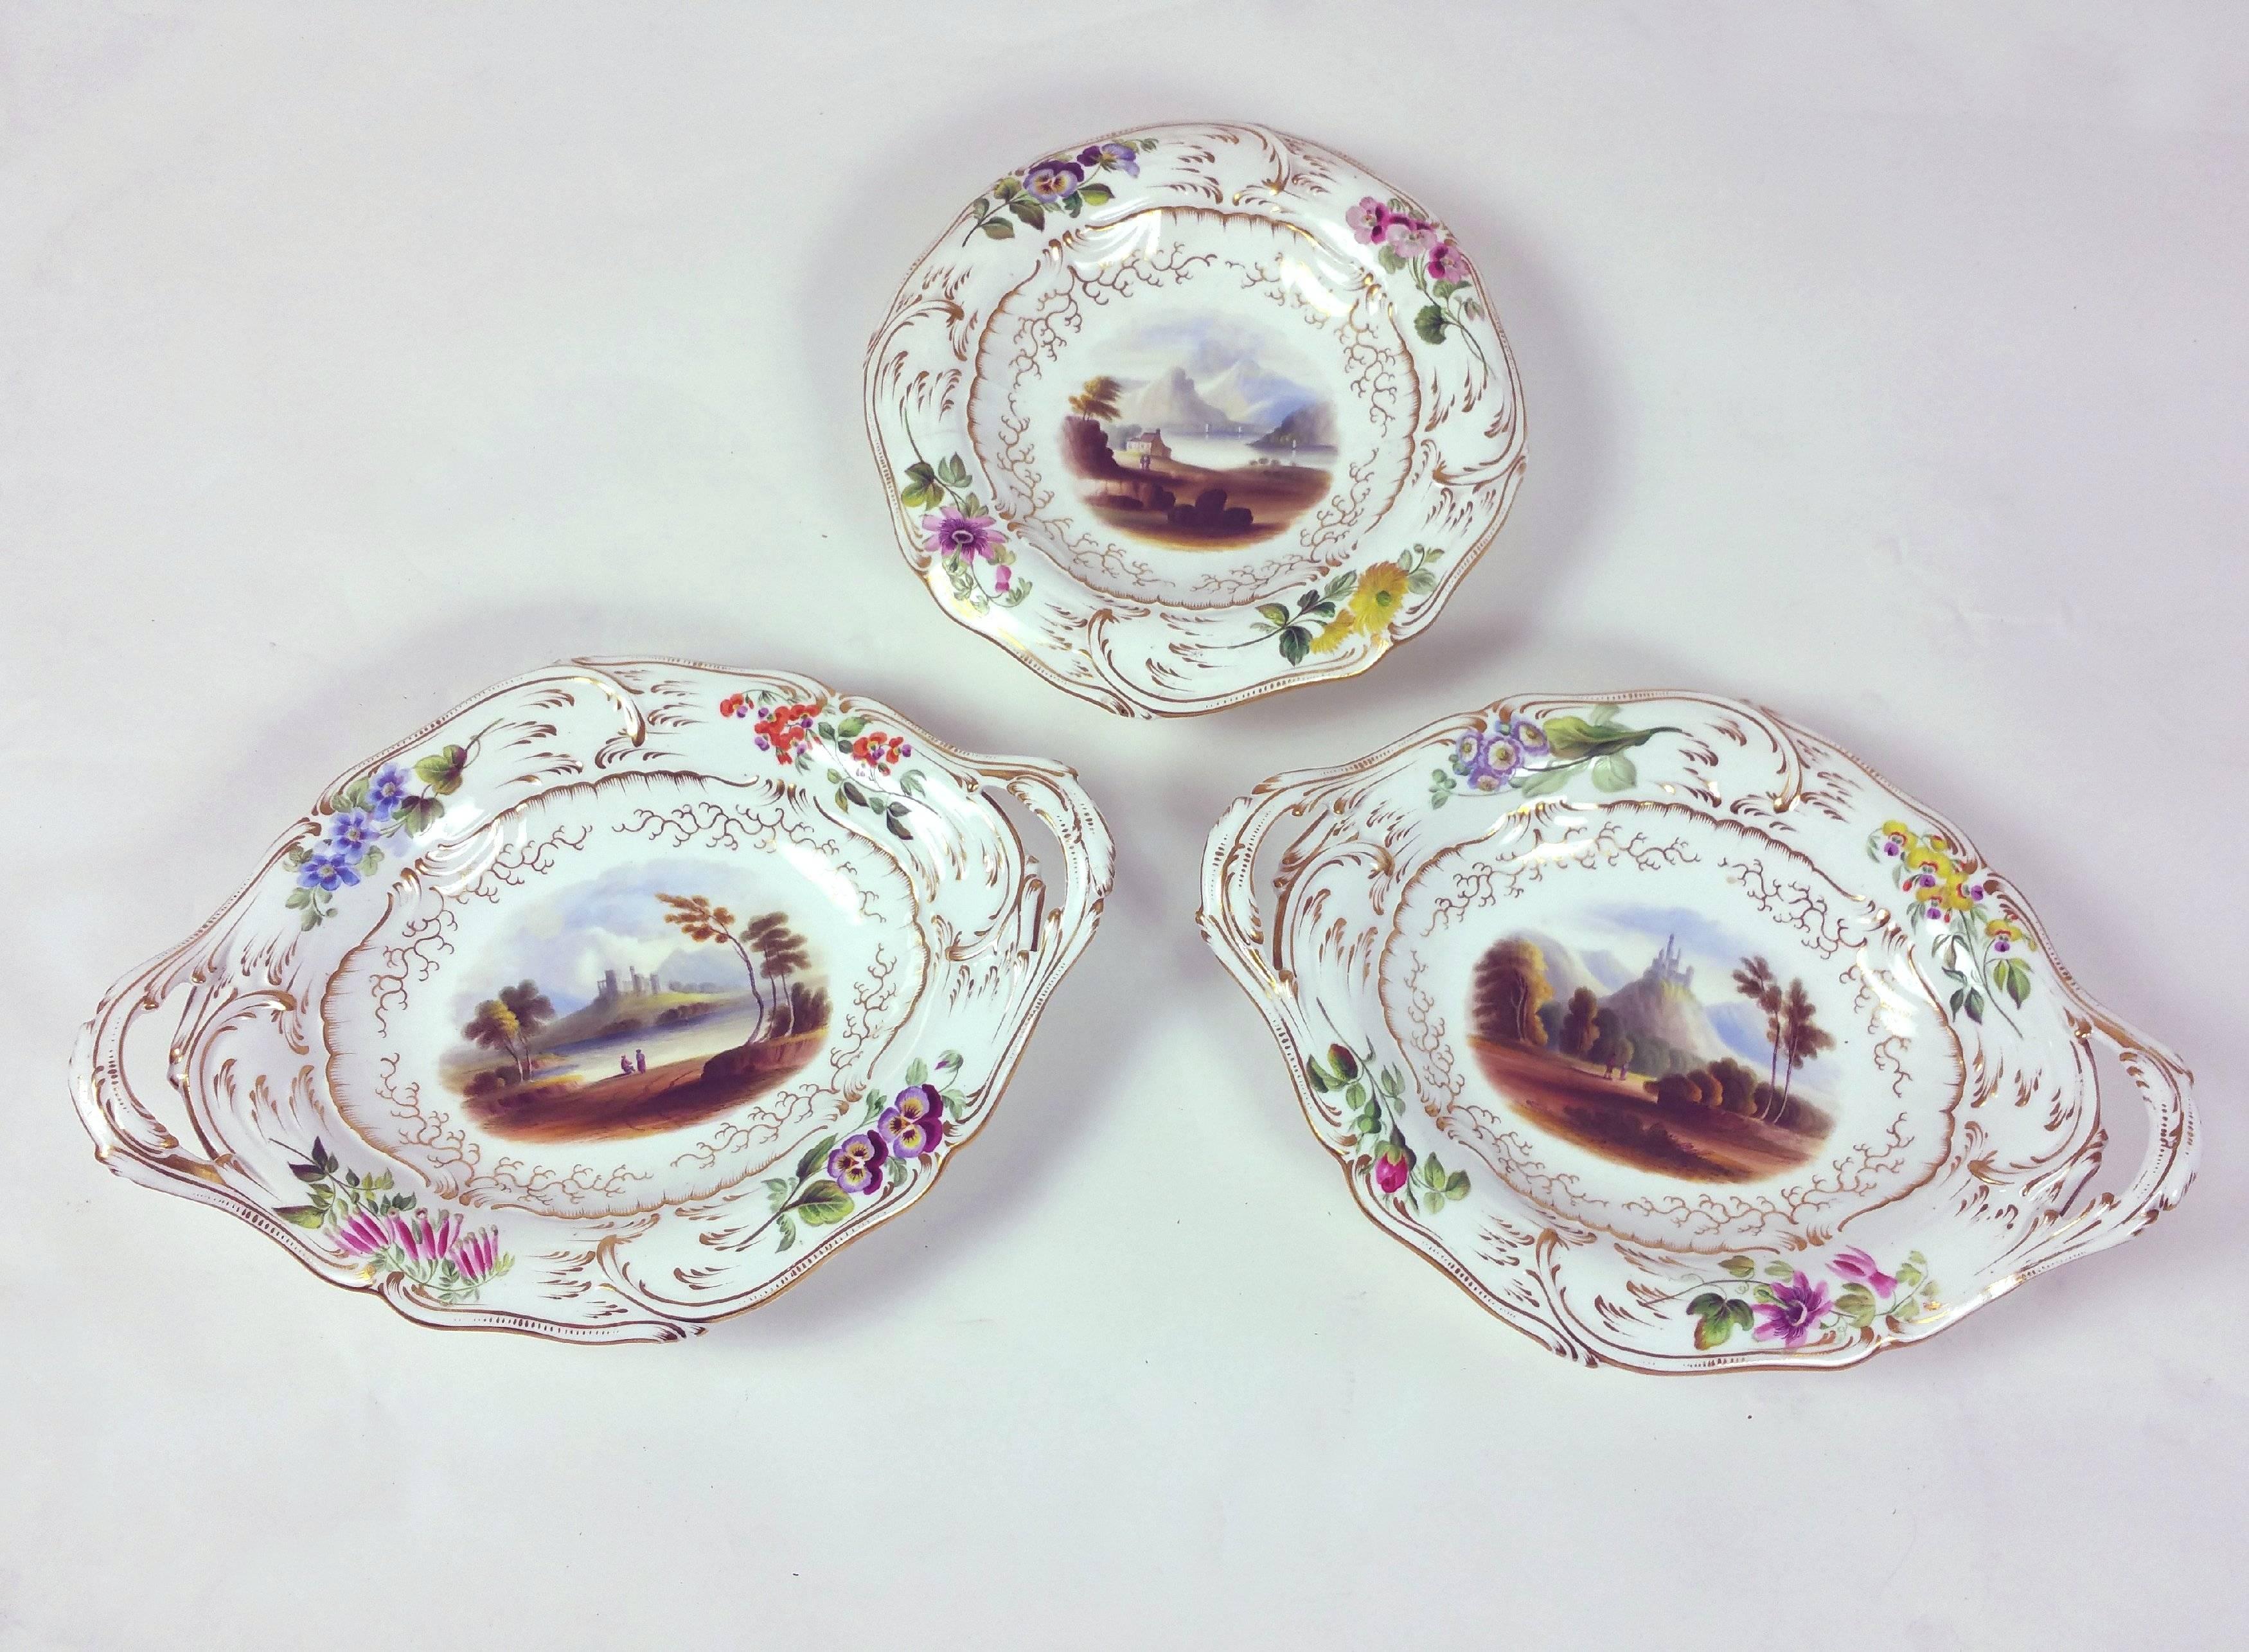 This stunning and beautifully hand-painted 19th century, English pottery dessert service features a finely detailed floral border with gold leaf and a central image of various English outdoor scenes of castles and rural settings. The set consists of